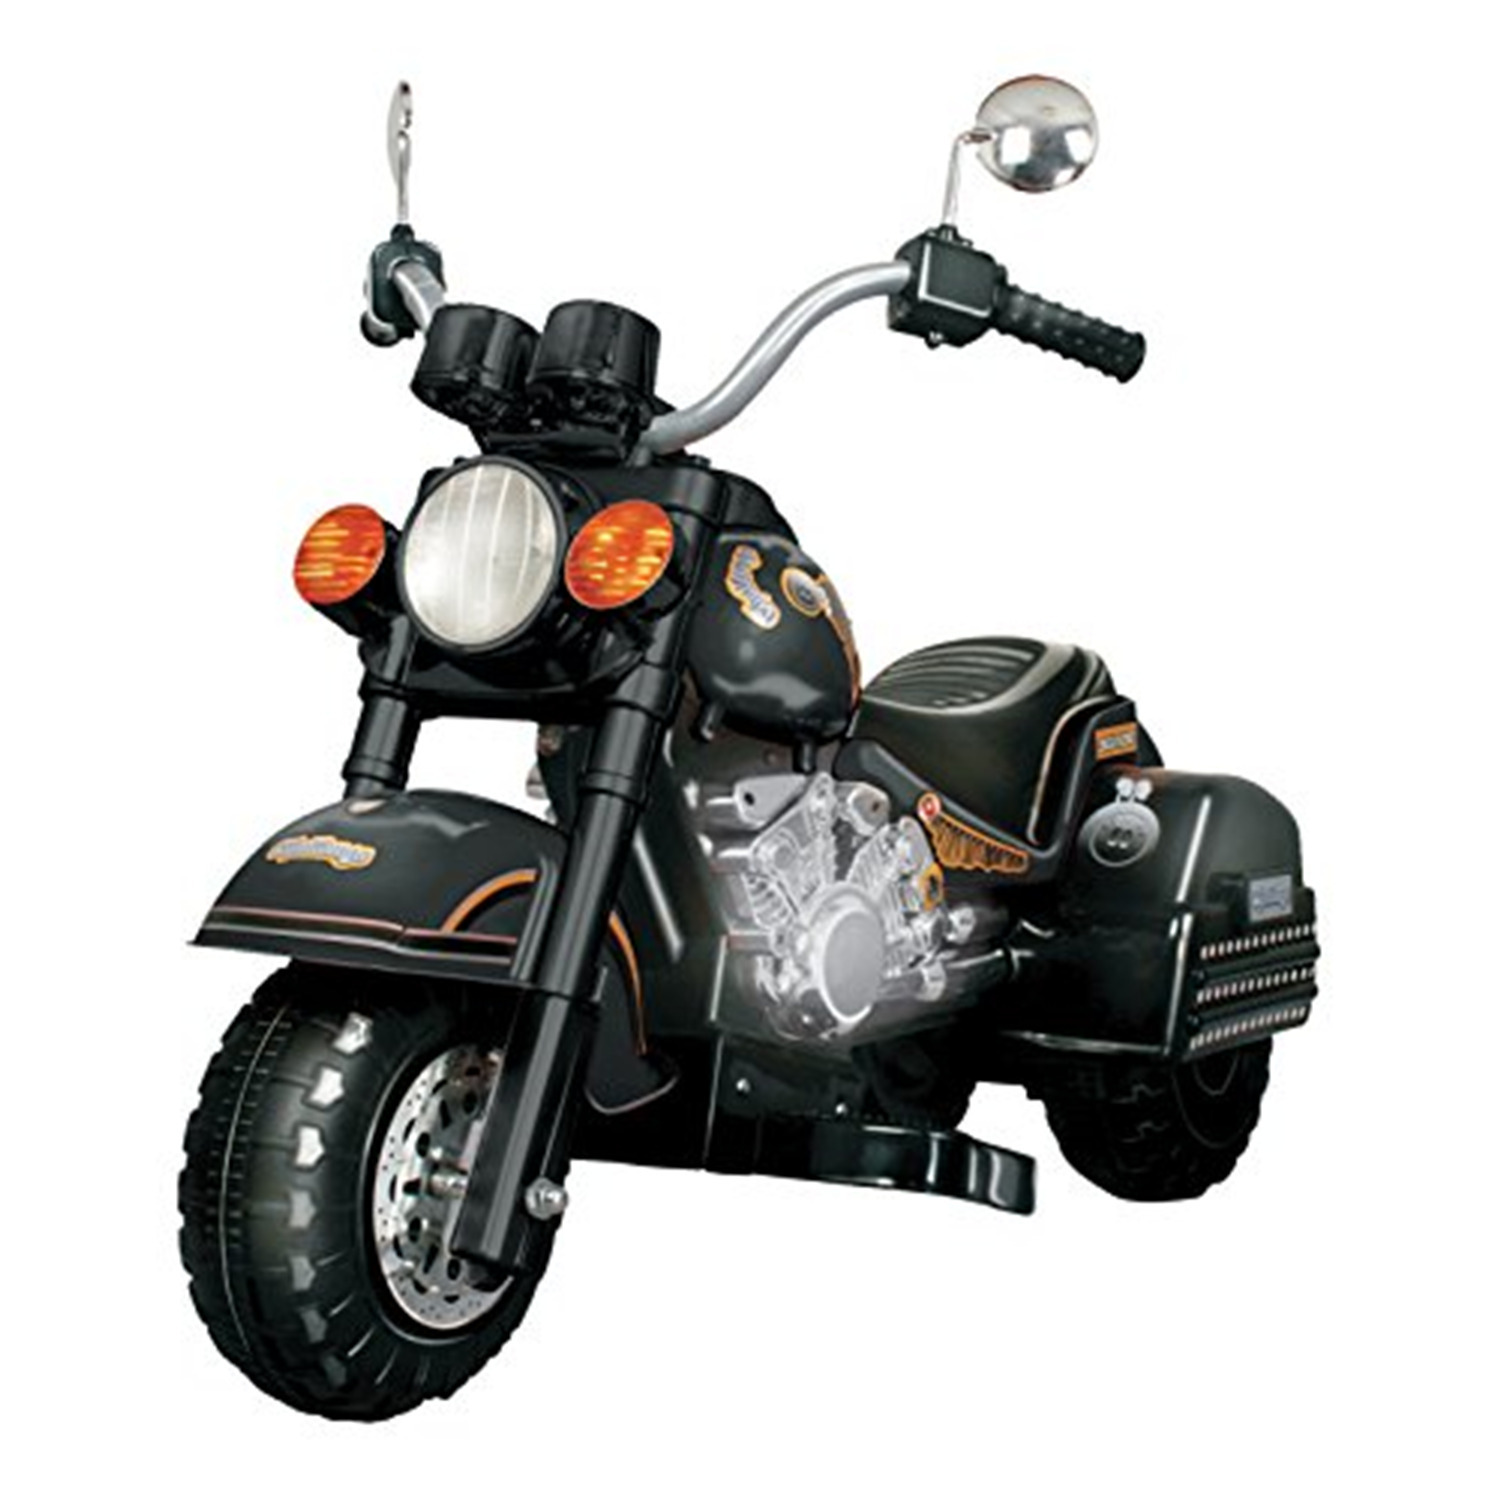 Vroom Rider Harley Style Chopper Style Limited Edition Motorcycle - Black - image 1 of 2